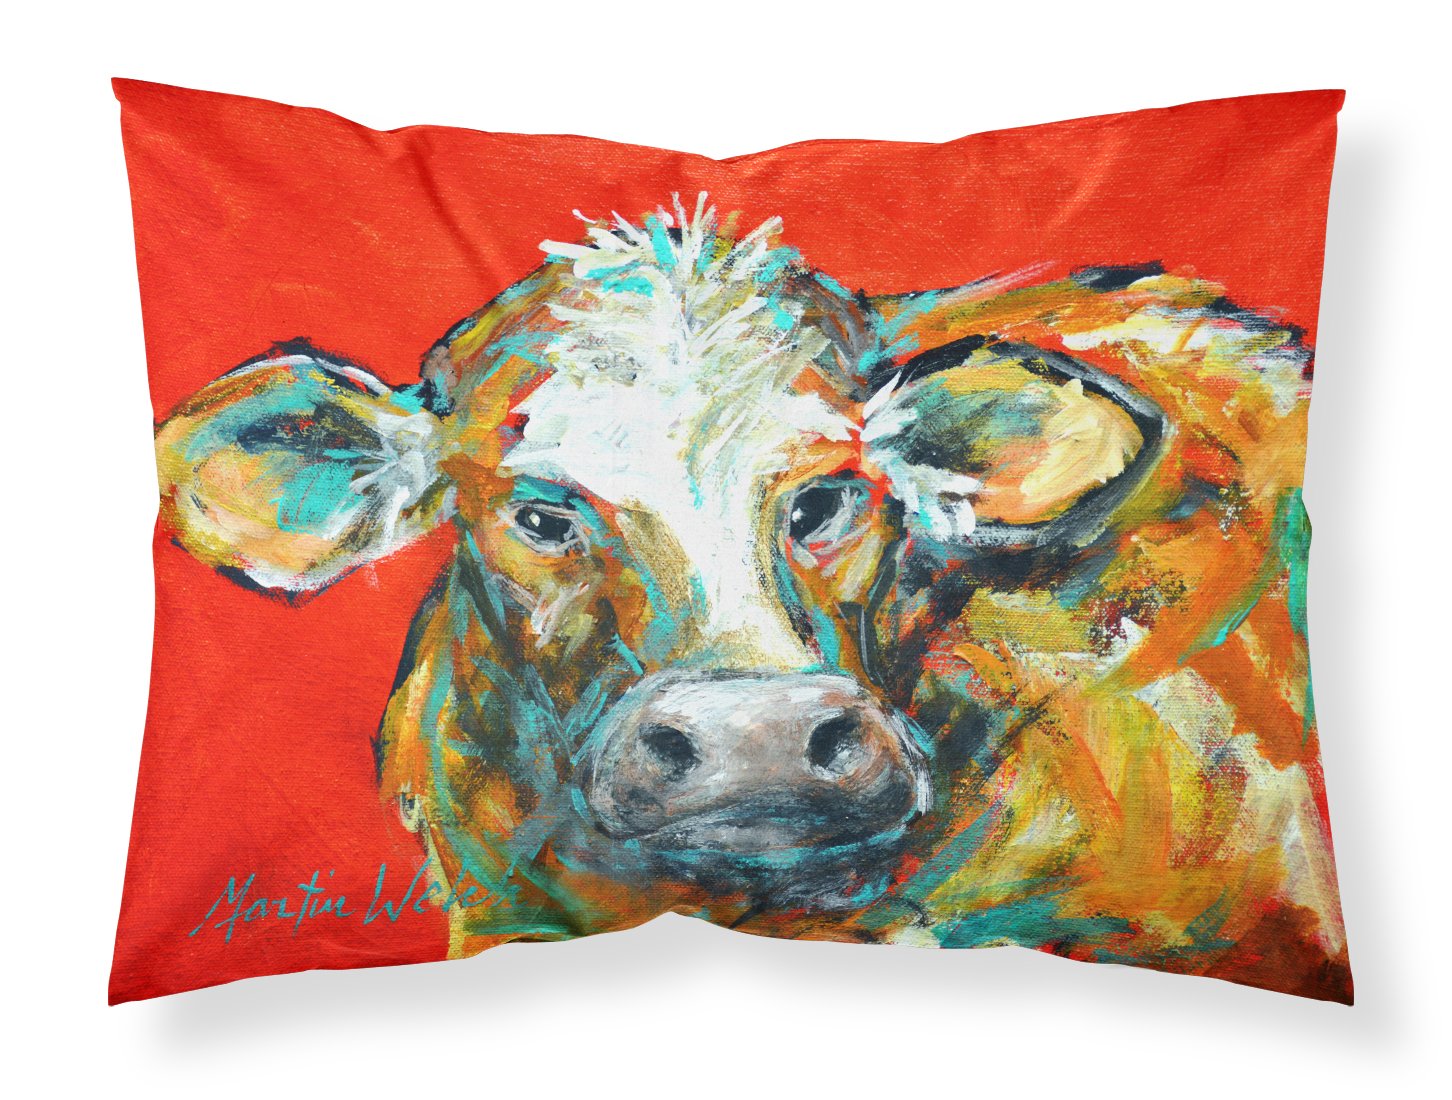 Caught Red Handed Cow Fabric Standard Pillowcase MW1272PILLOWCASE by Caroline's Treasures